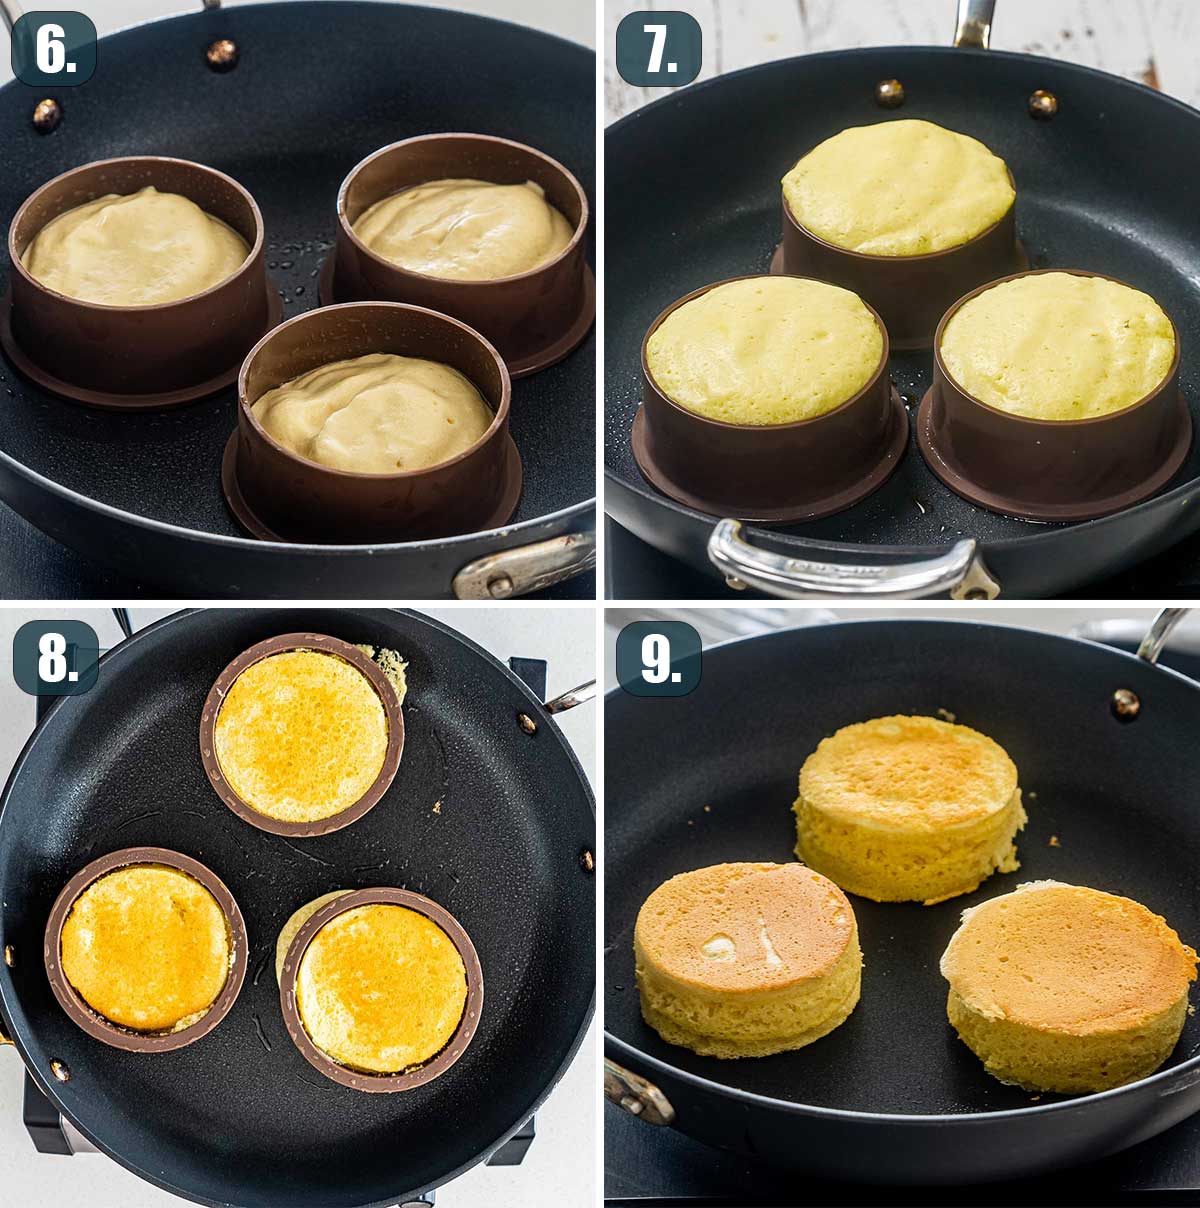 detailed process shots showing how to cook japanese pancakes.